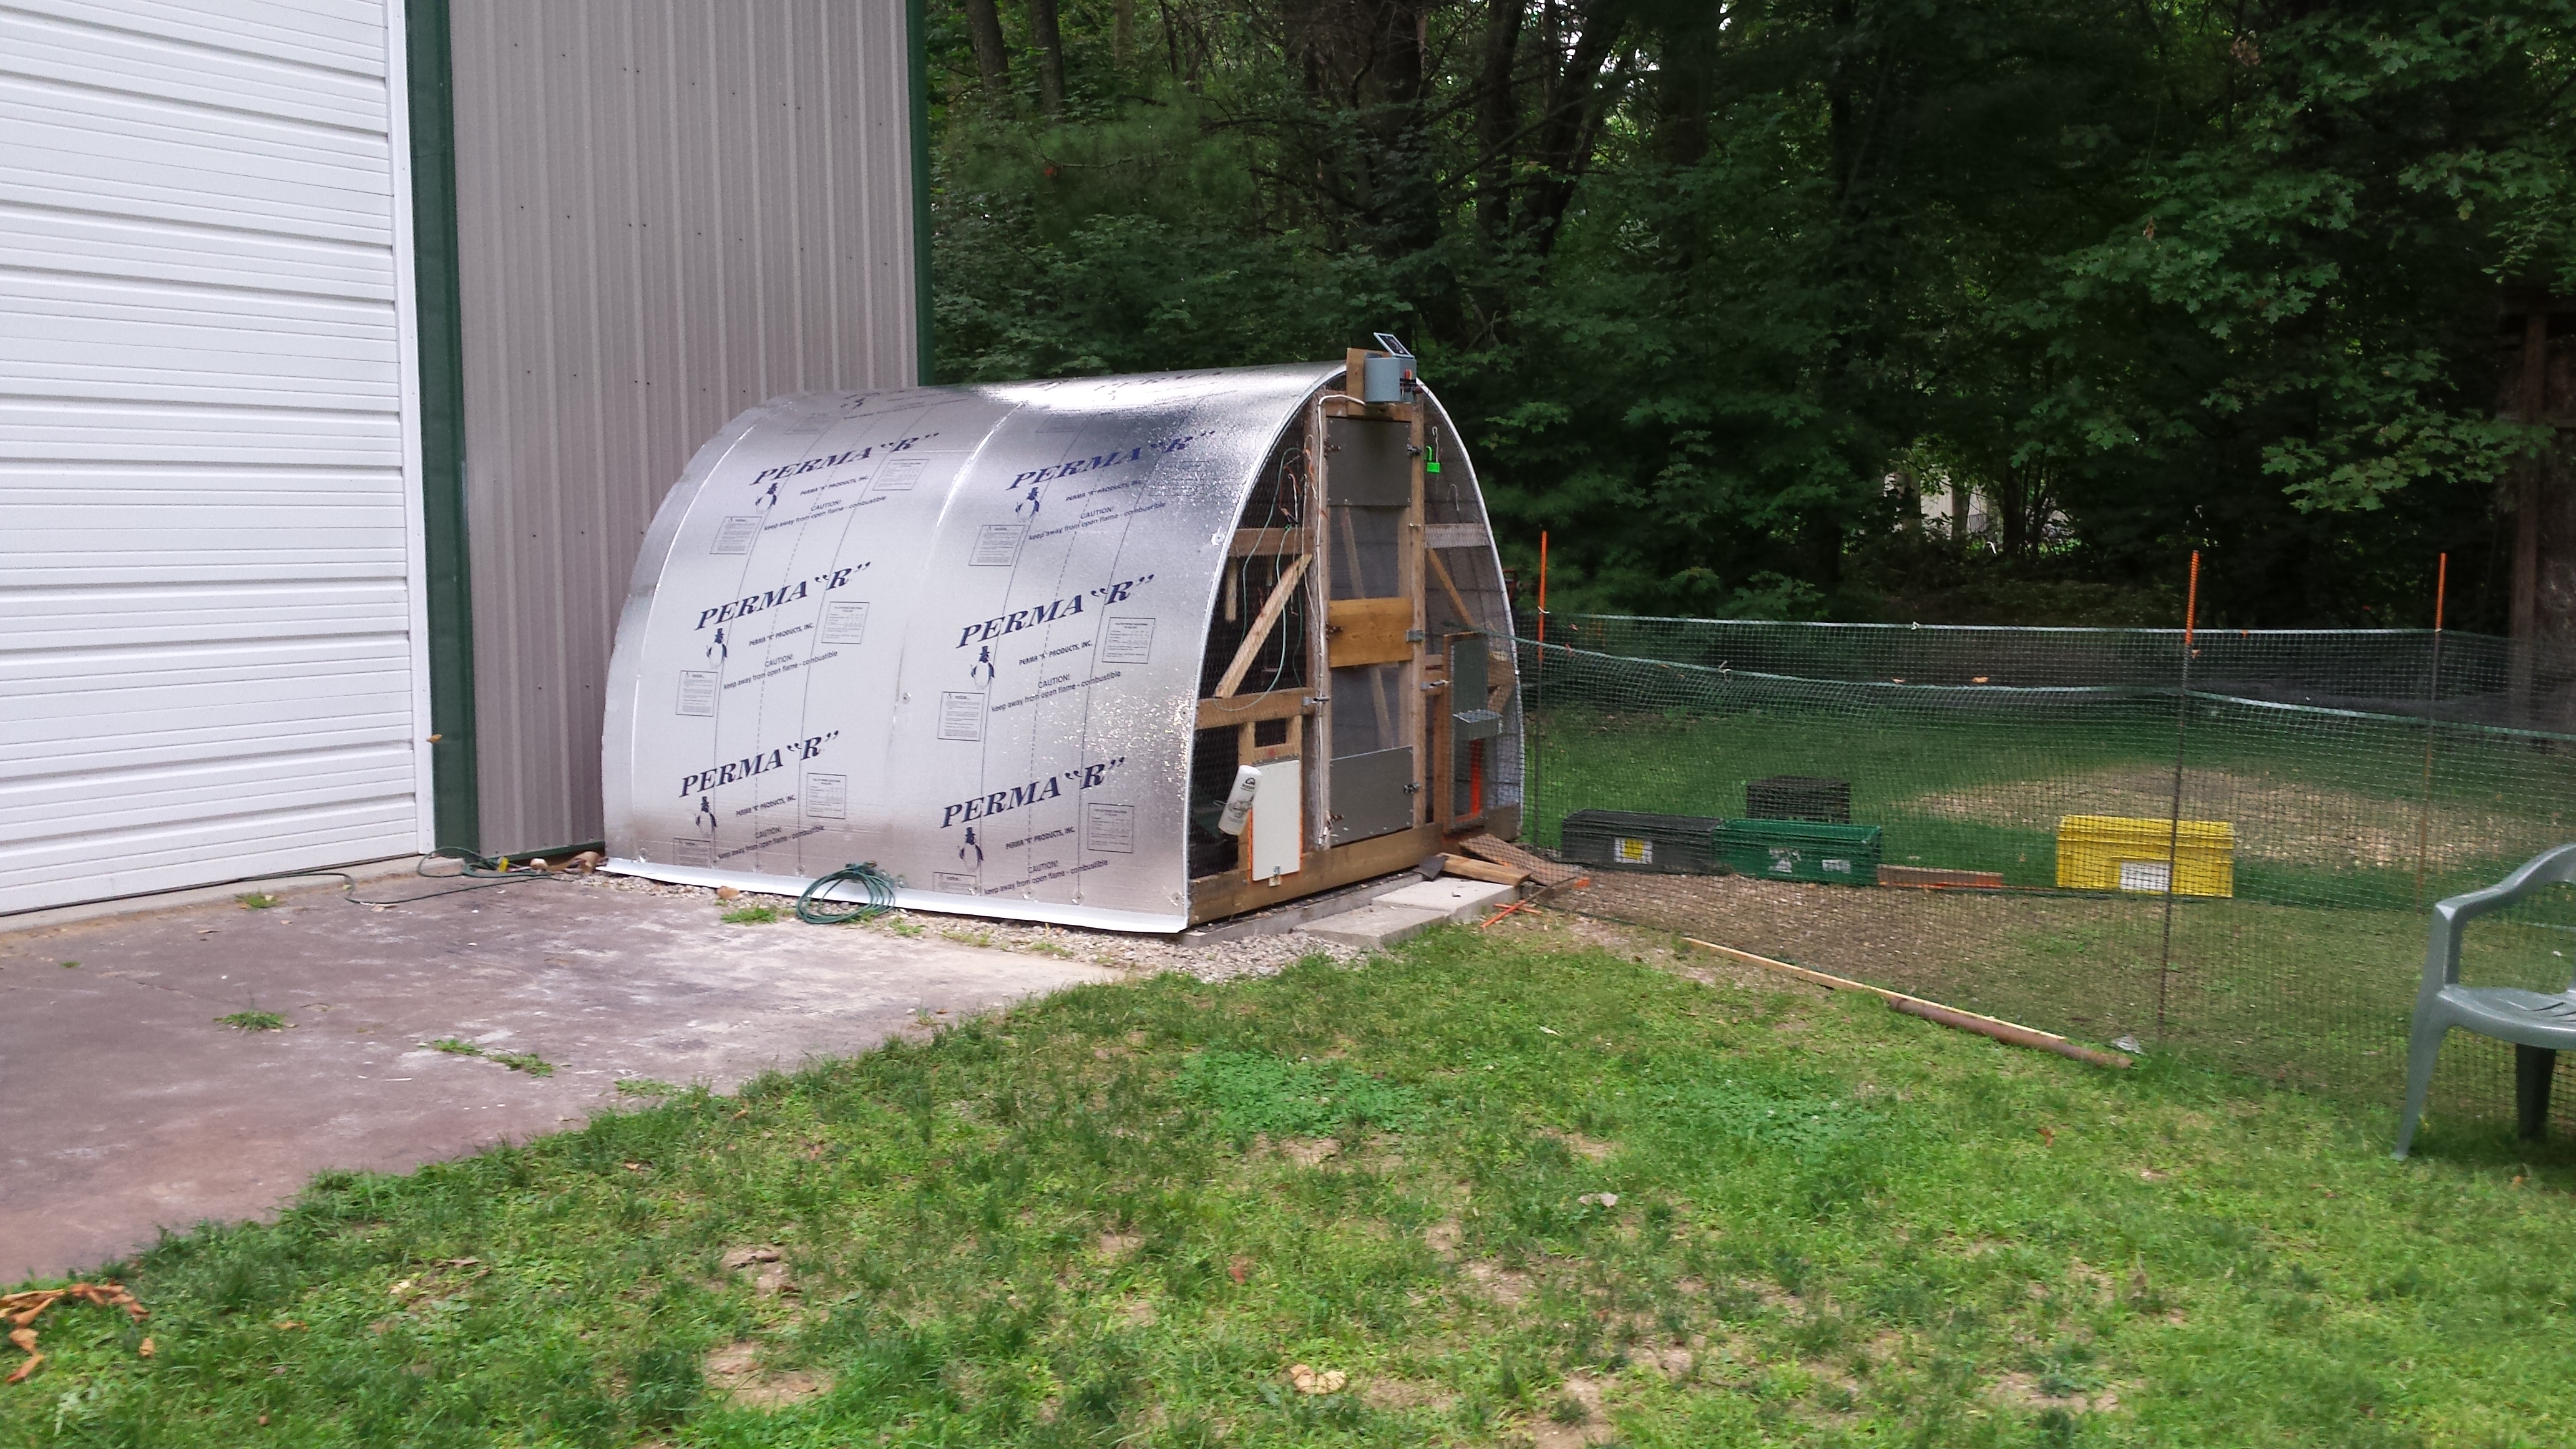 coop with 4 - 4'x8' sheets of eps  foam board installed and taped